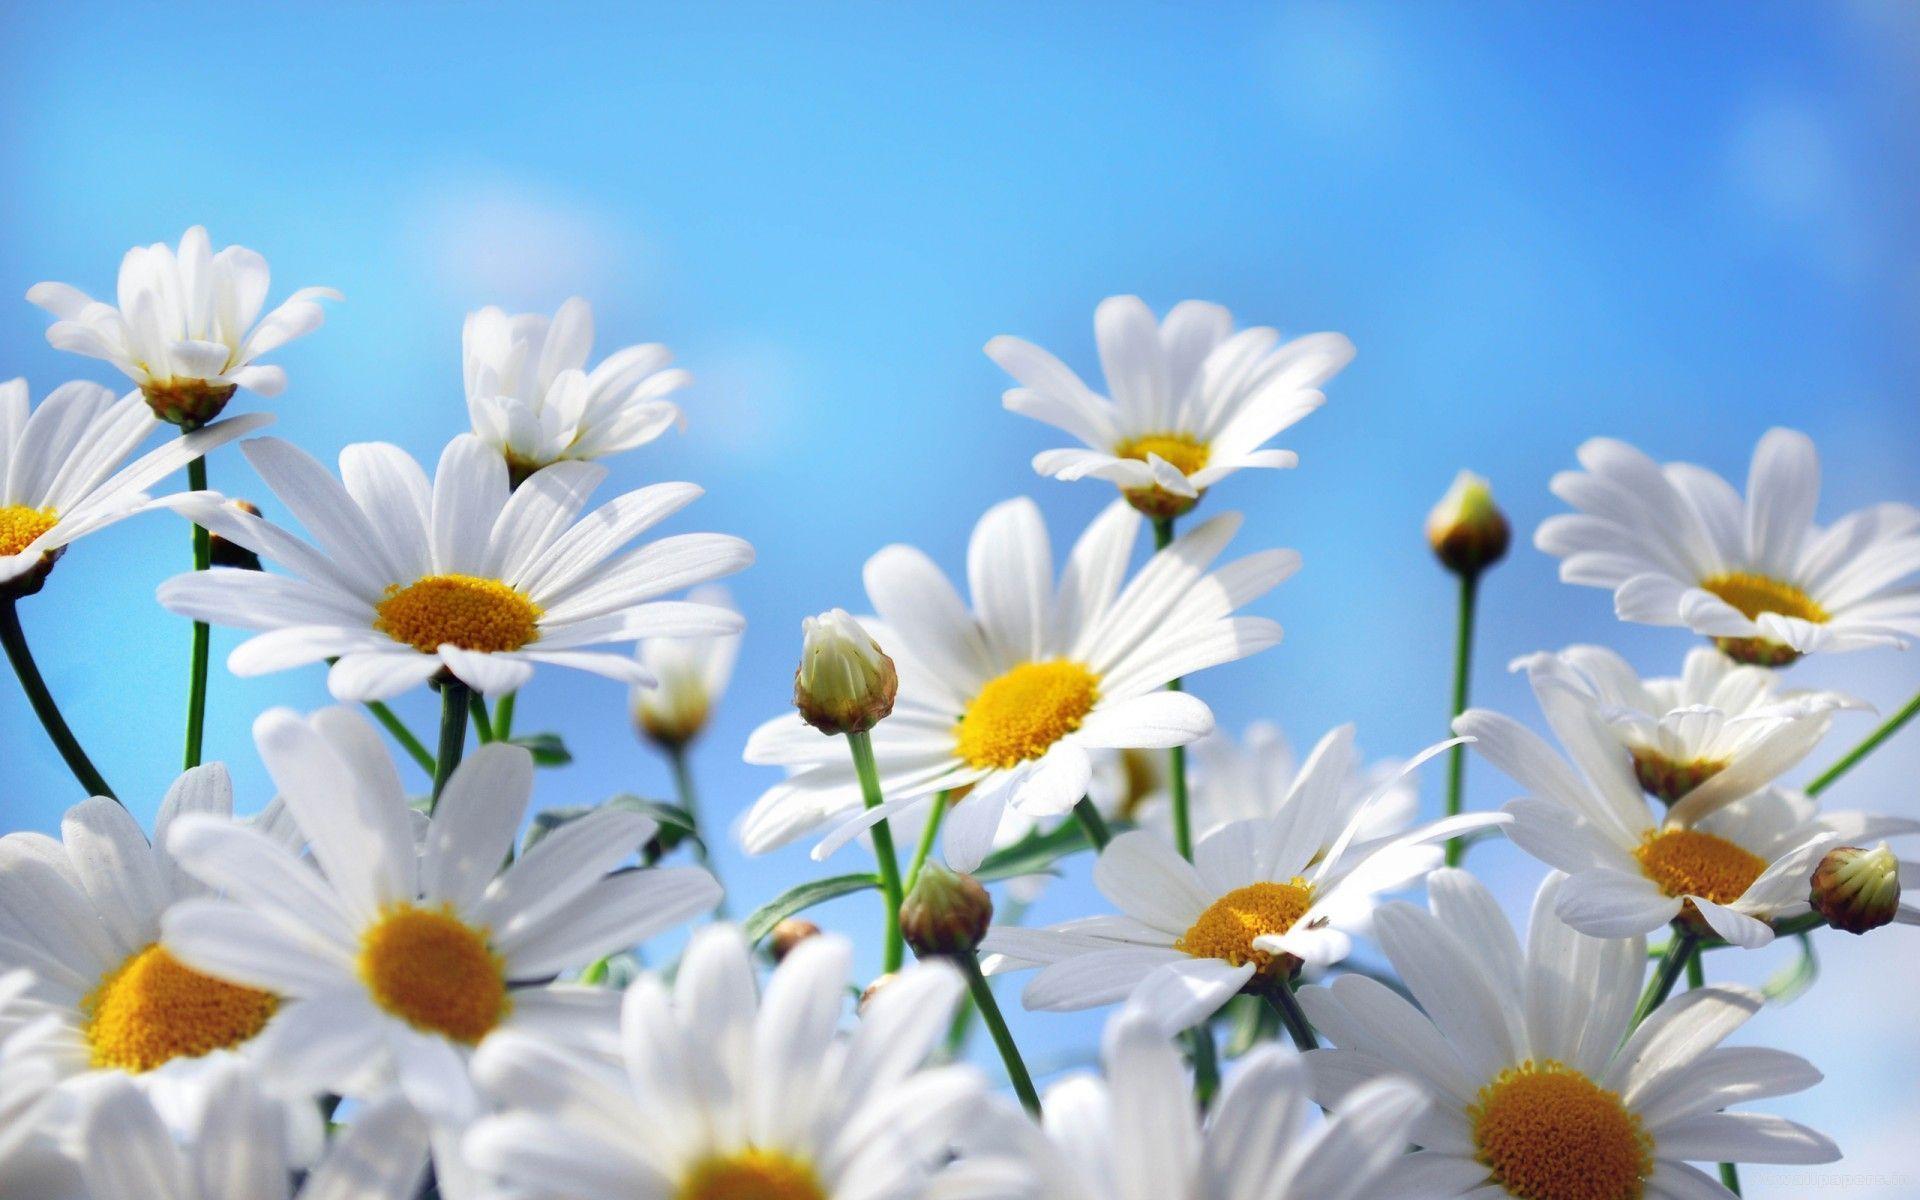 Wallpaper For > White Daisies Background